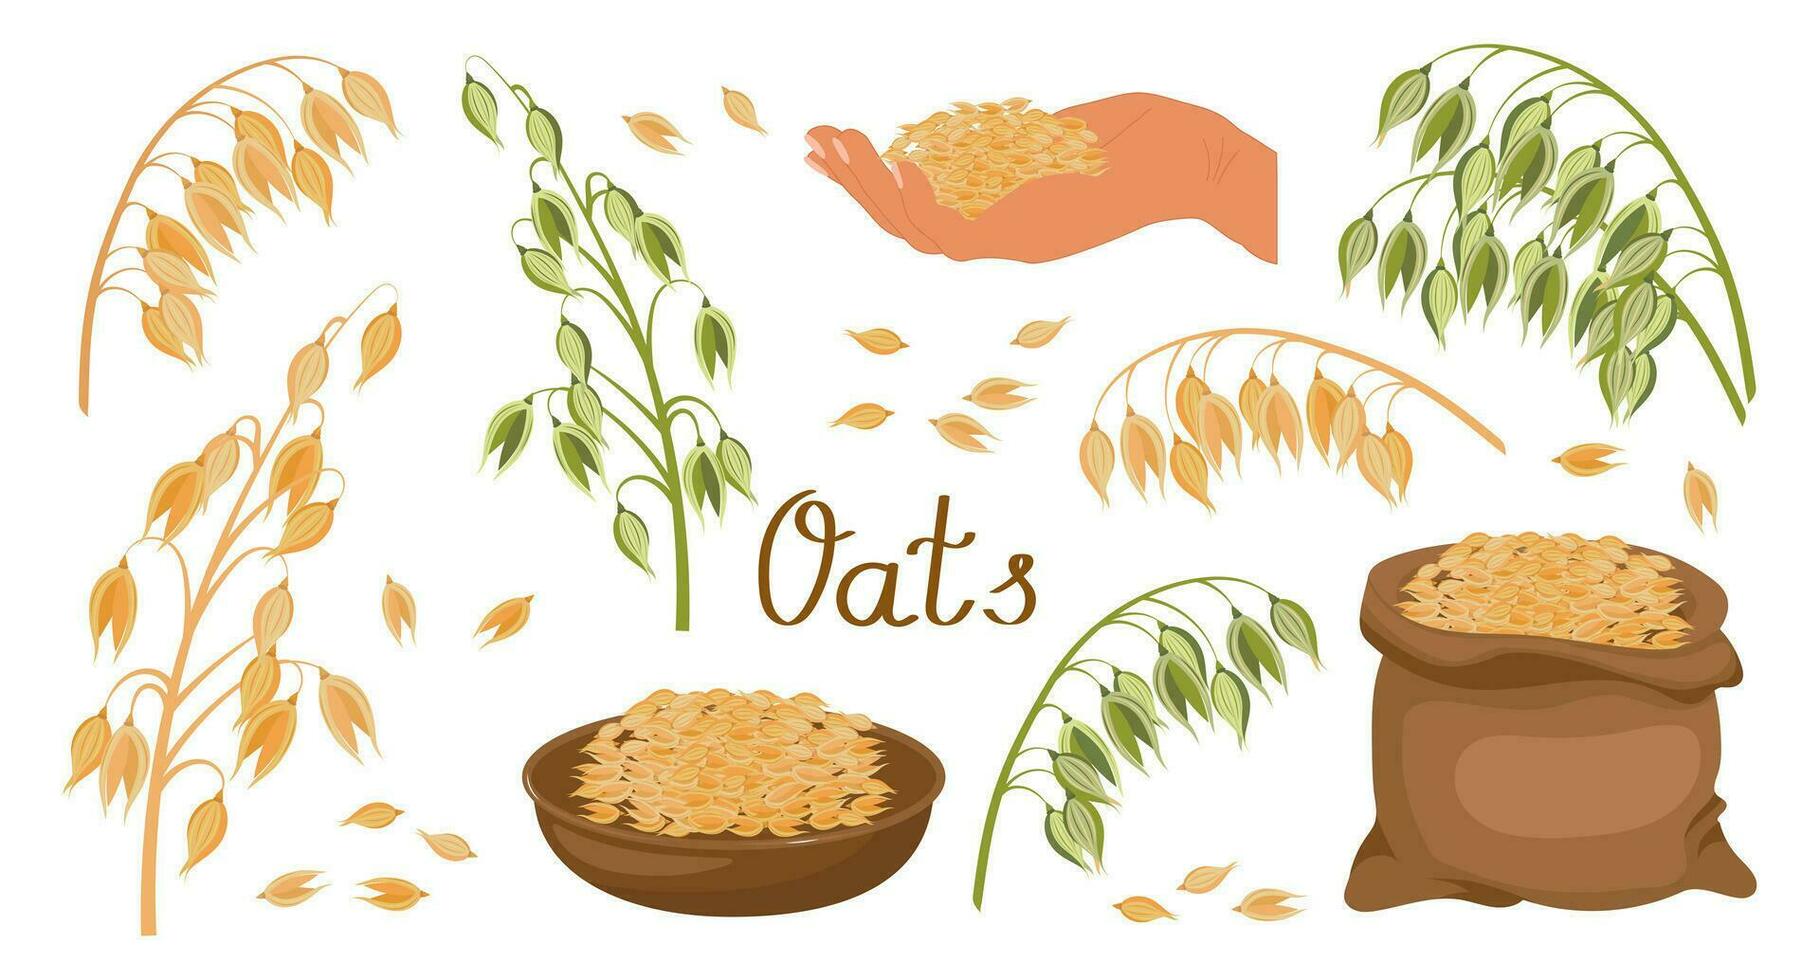 A set of grains and spikelets of oats. Oats plant, oat grains in a plate, in a hand and a bag. Agriculture background, design elements, vector